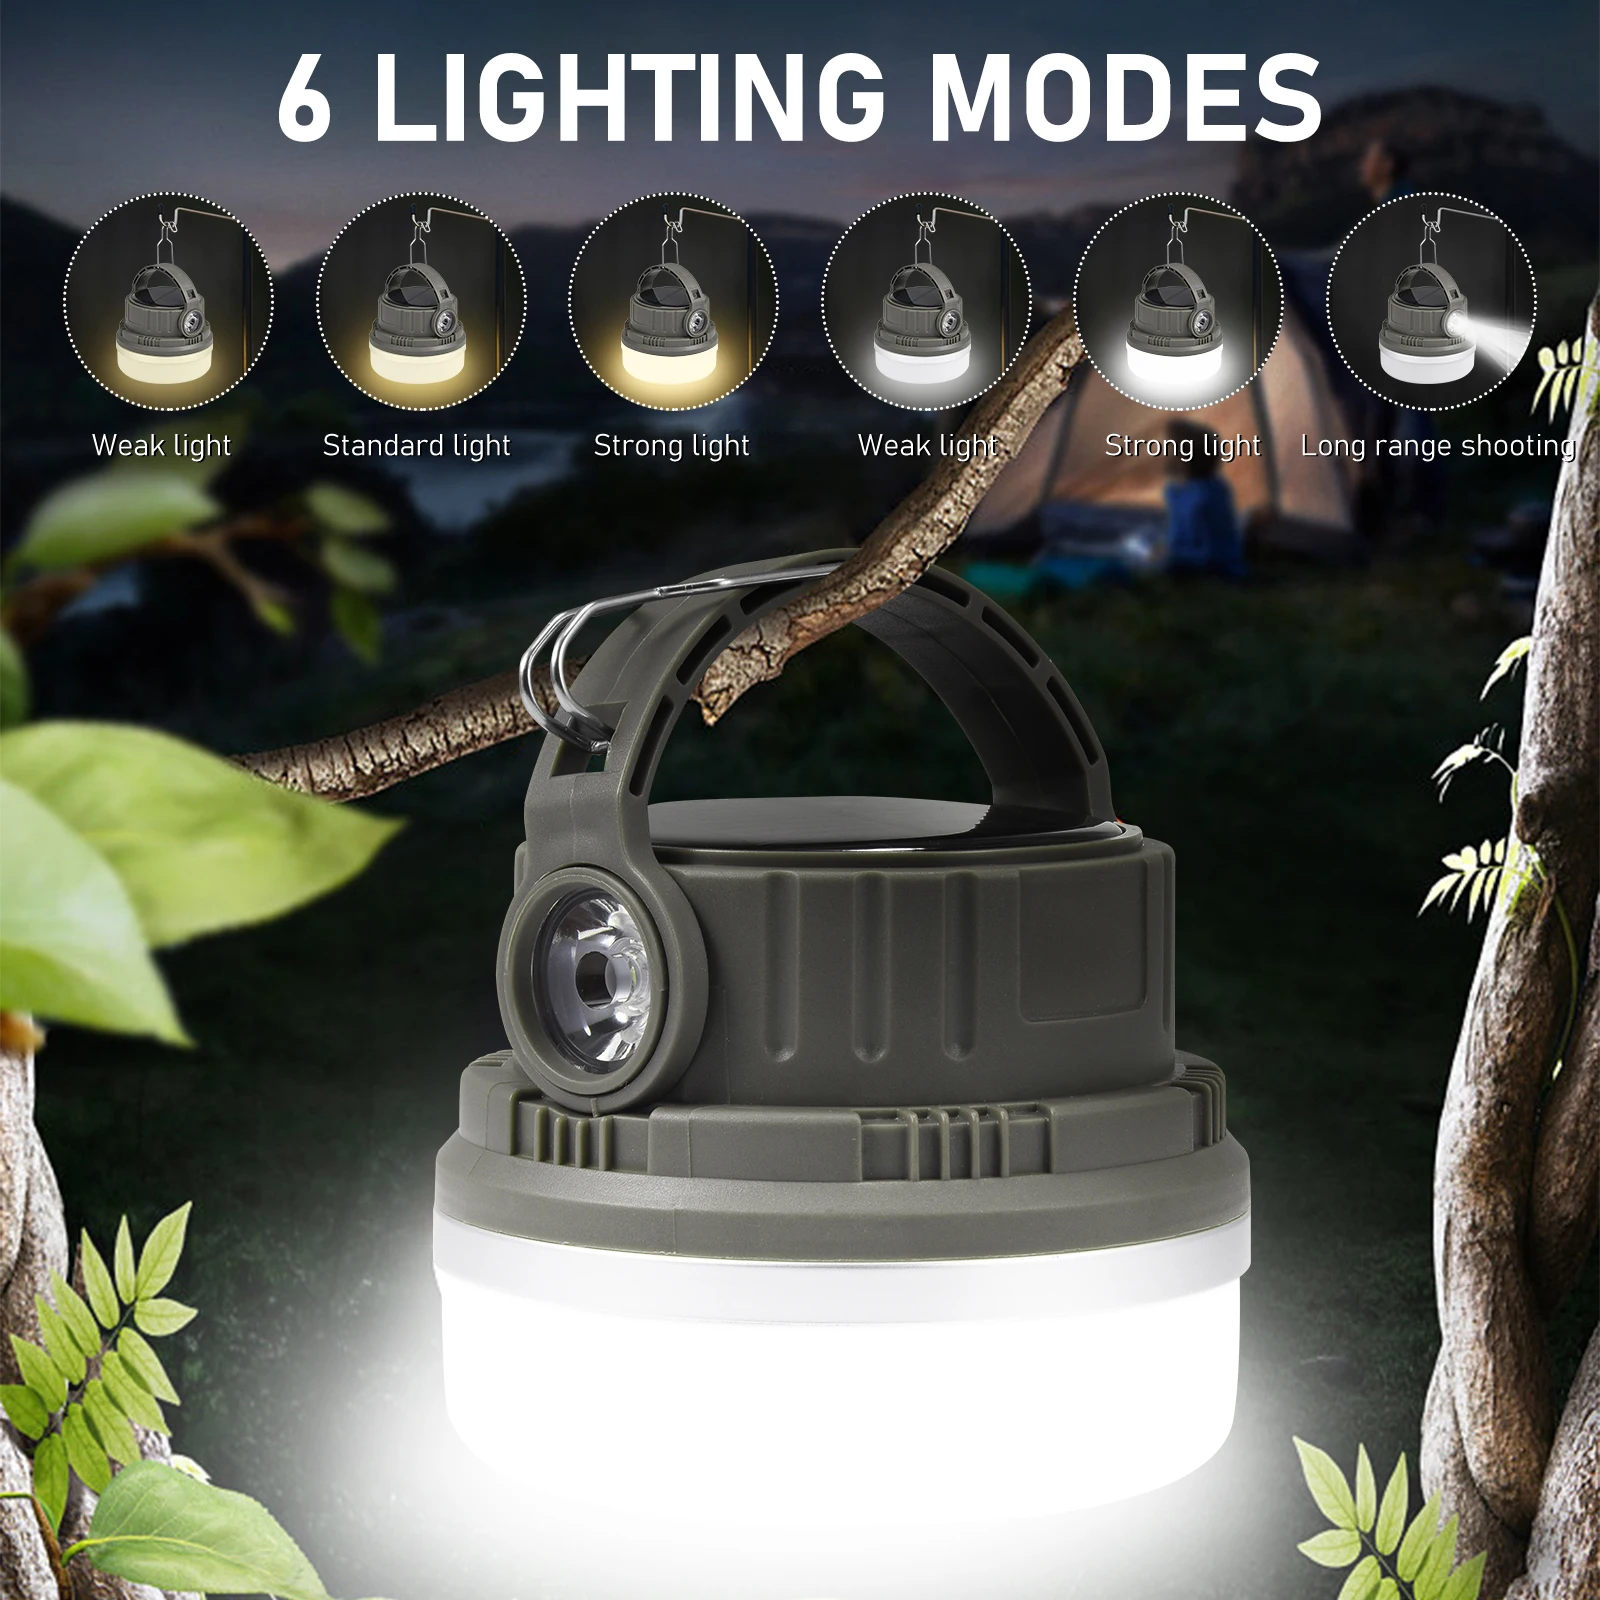 LED Camping Light Color Changing Light With USB Charging 5 Lighting Modes Dimming Waterproof Strong Magnetic Camping Light